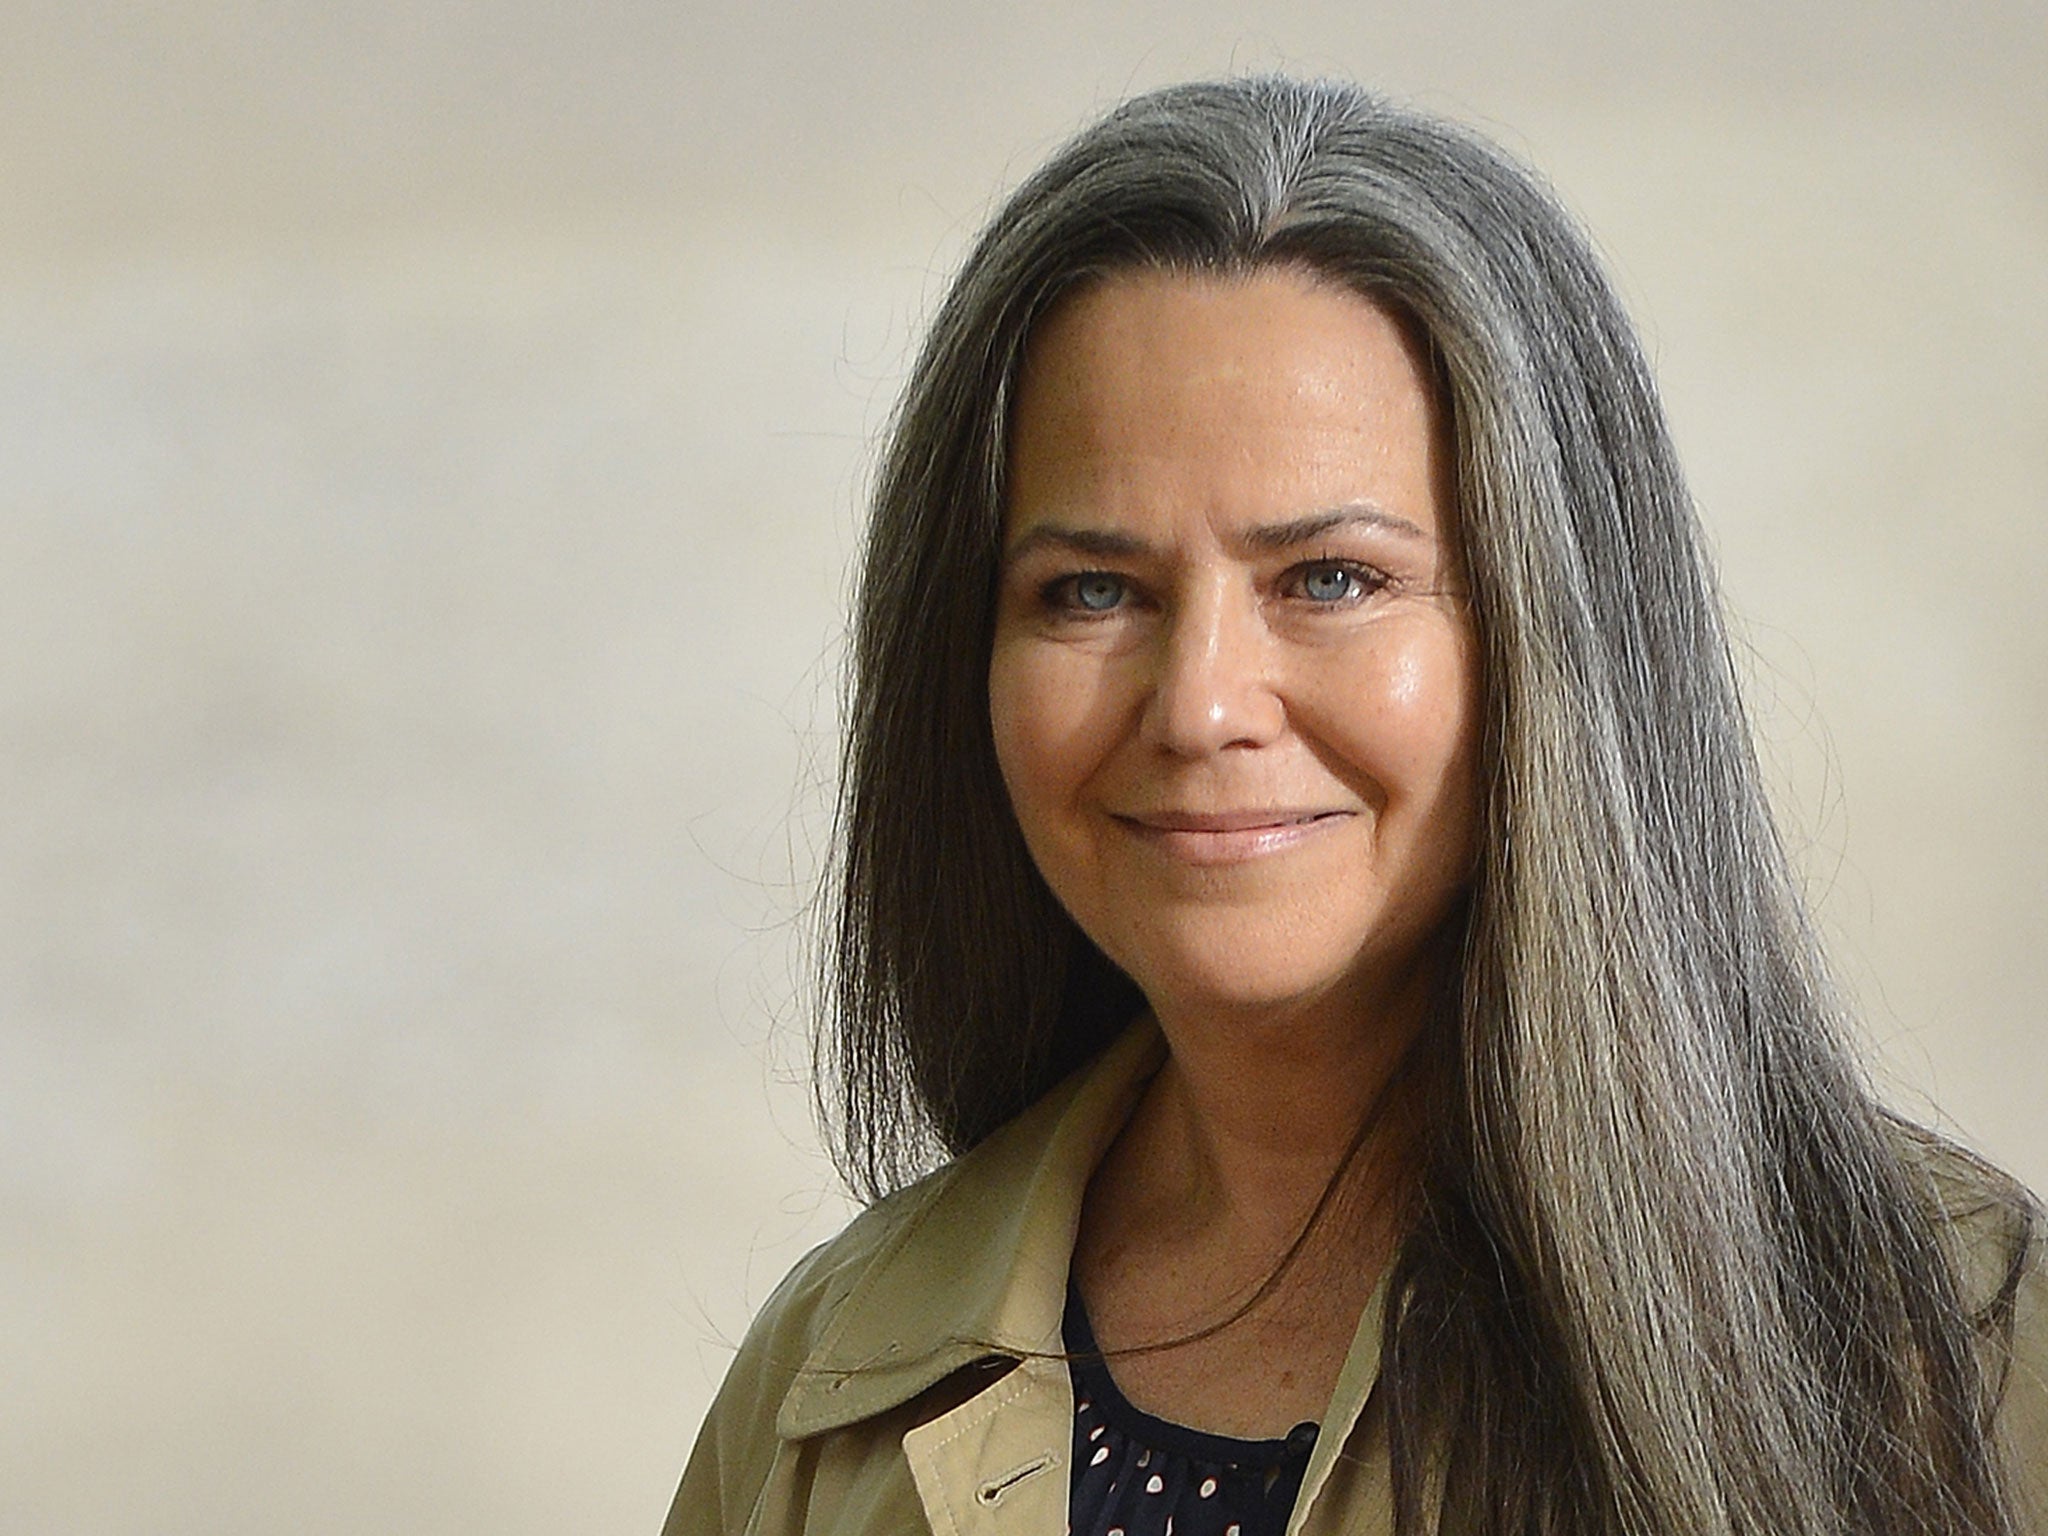 The Duke of York's ex-girlfriend Koo Stark appeared in court today to deny stealing a painting worth £40,000 from a former partner